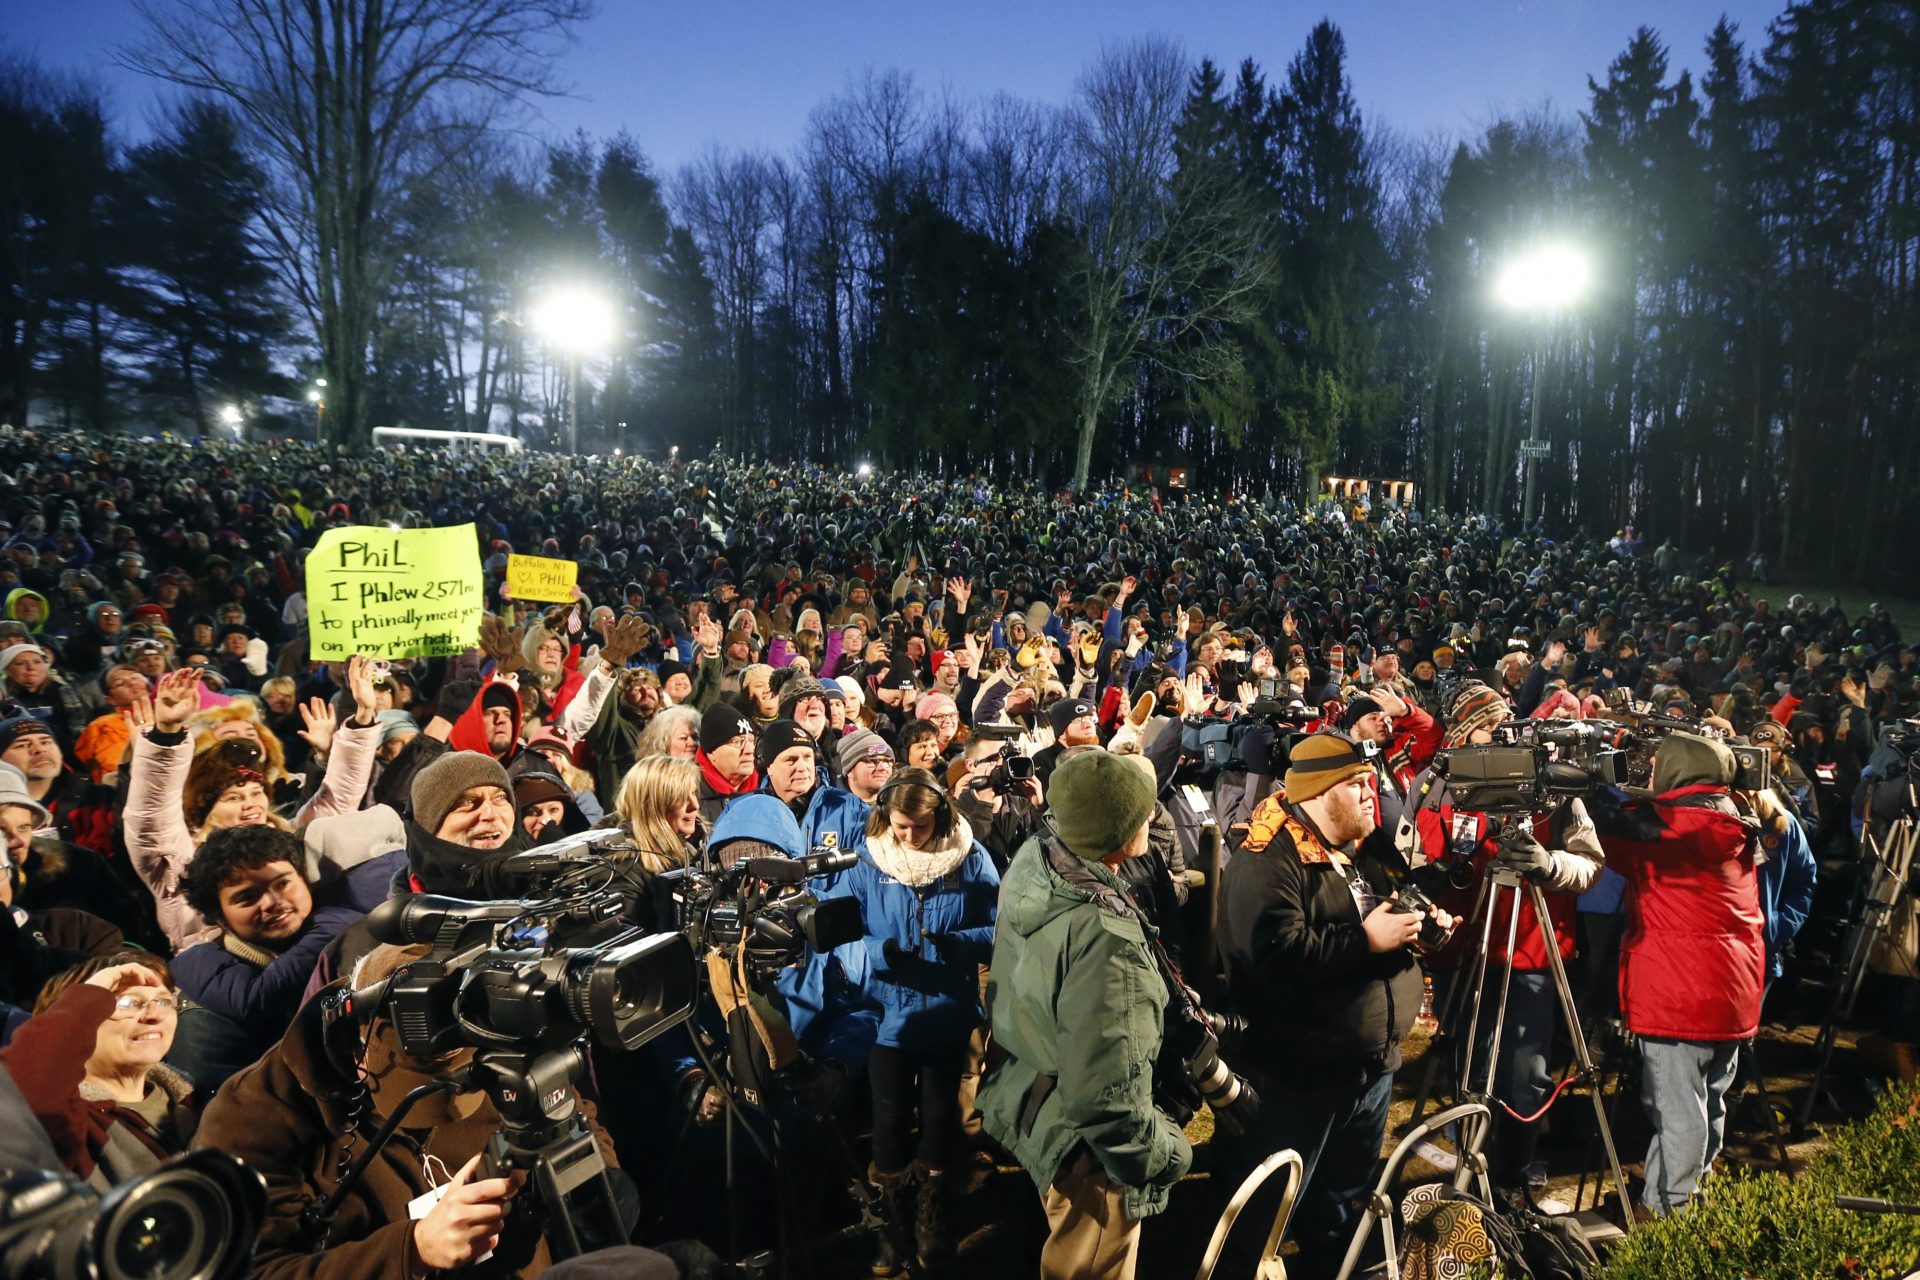 A crowd watches during the annual celebration of Groundhog Day on Gobbler's Knob in Pennsylvania Tuesday, Feb. 2, 2016.